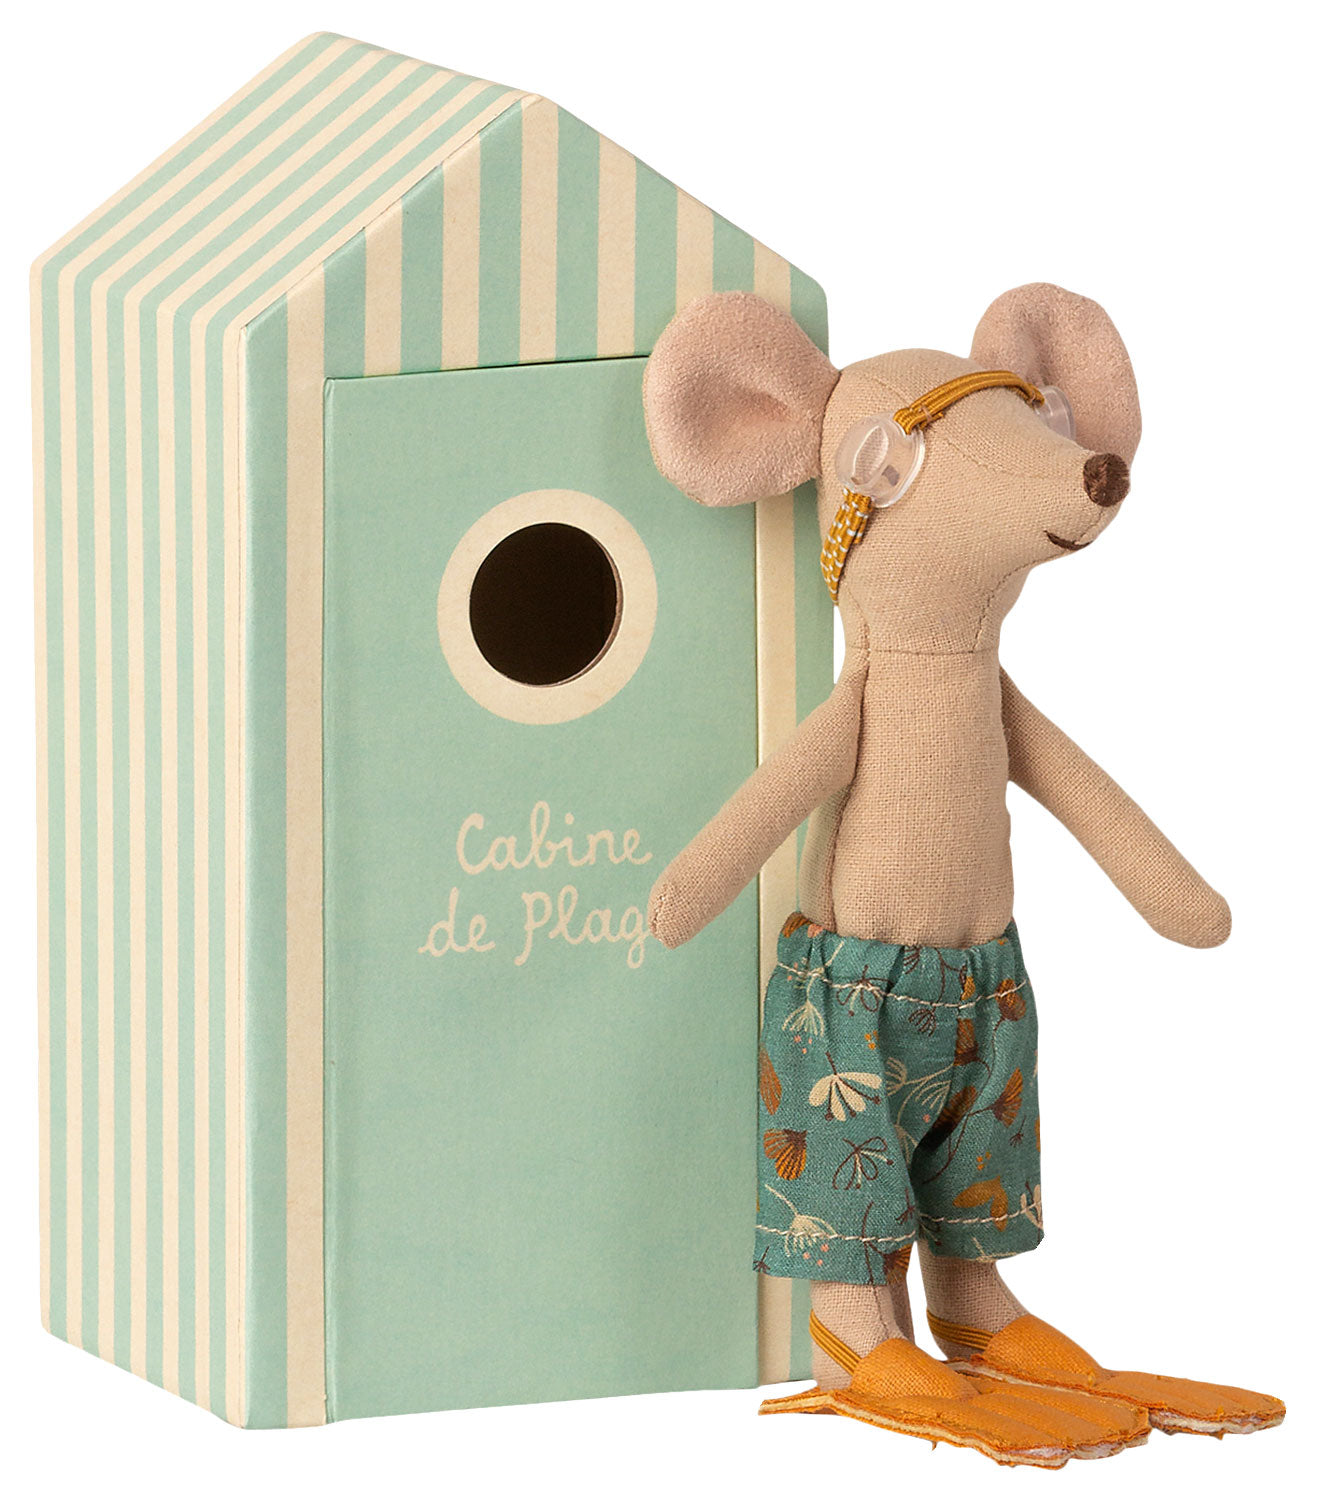 Maileg Big Brother Beach Mouse in Cabin de Plage